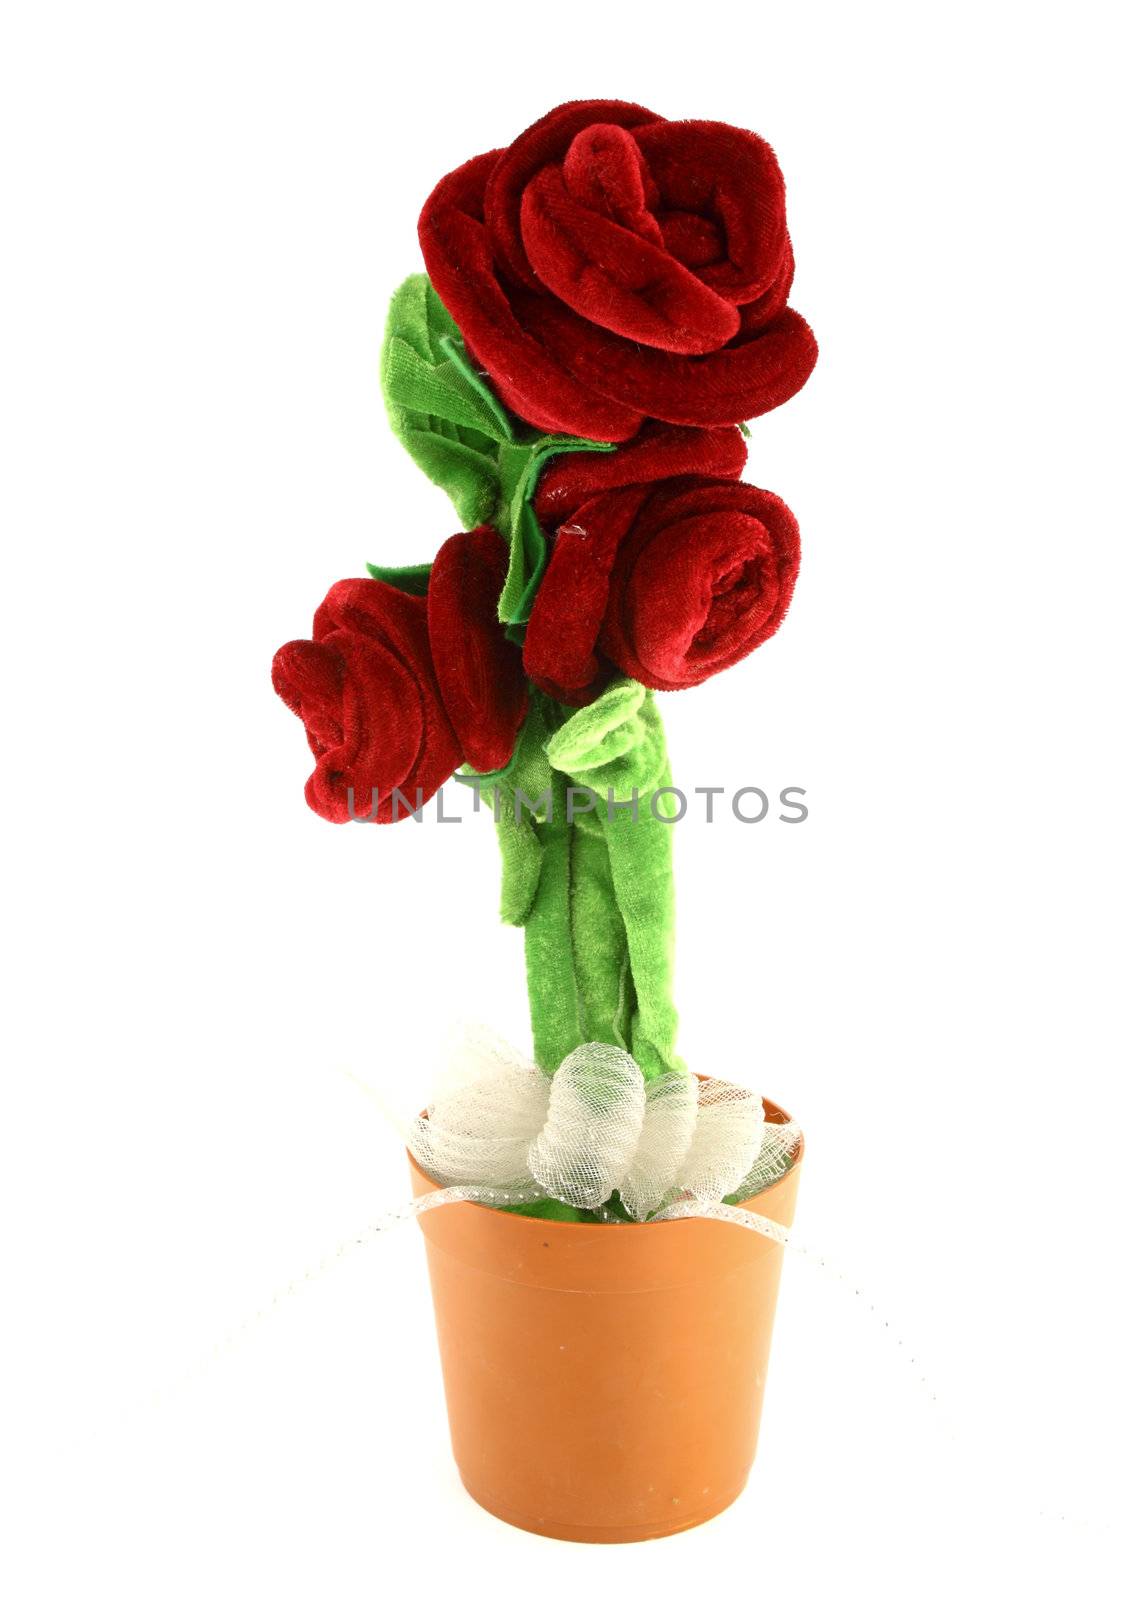 Rose made from wool fabric on white background